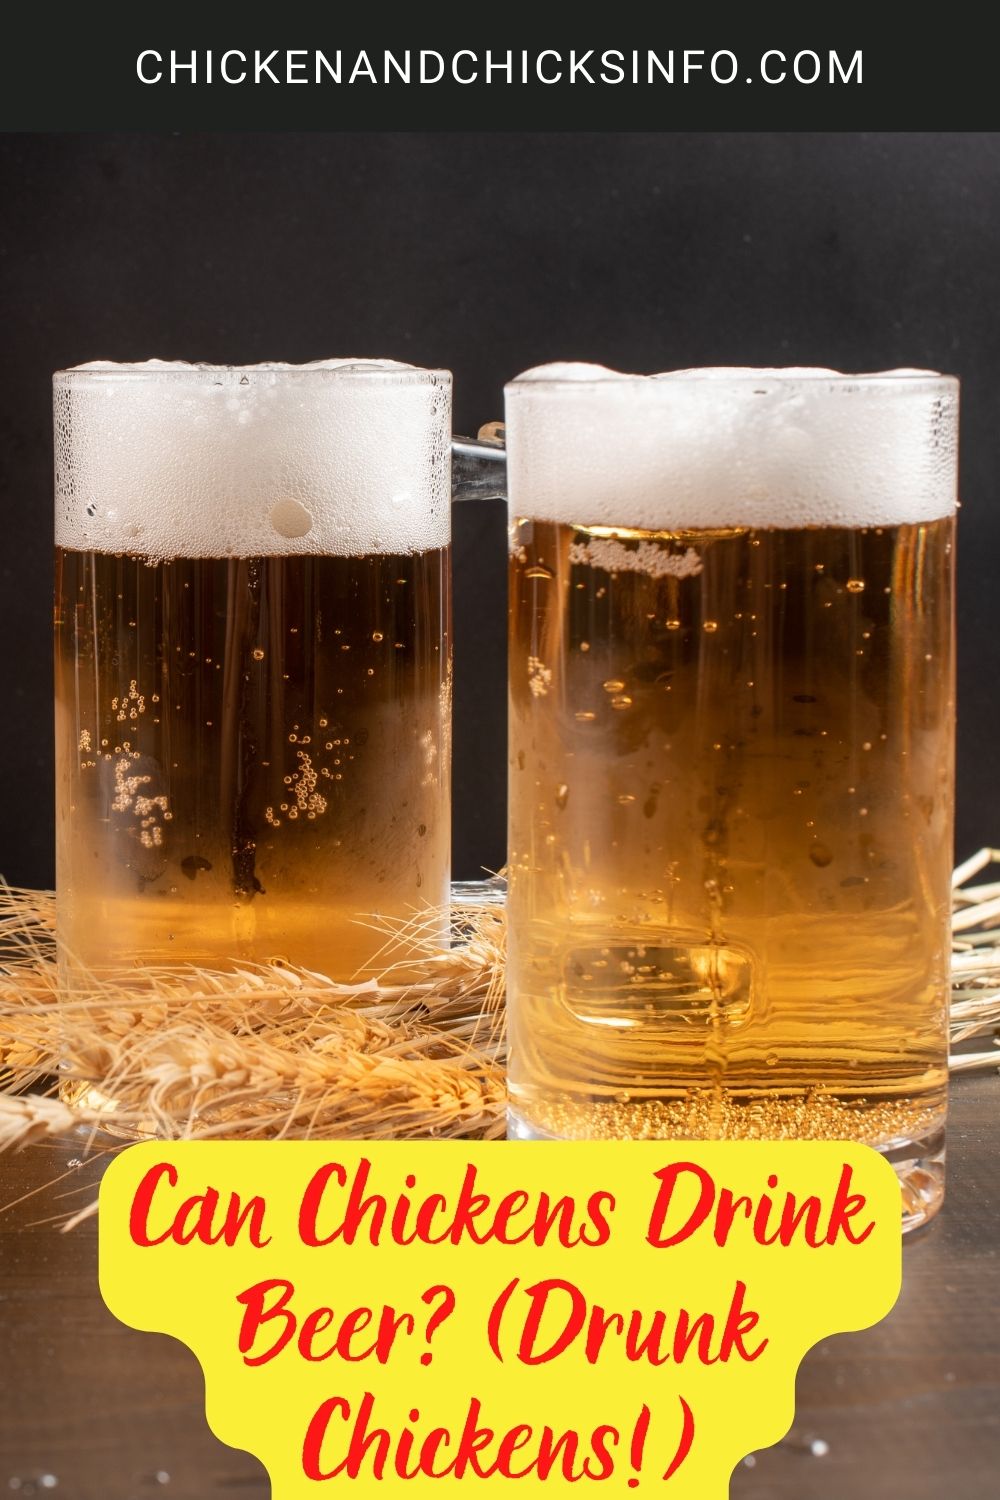 Can Chickens Drink Beer? (Drunk Chickens!) poster.
